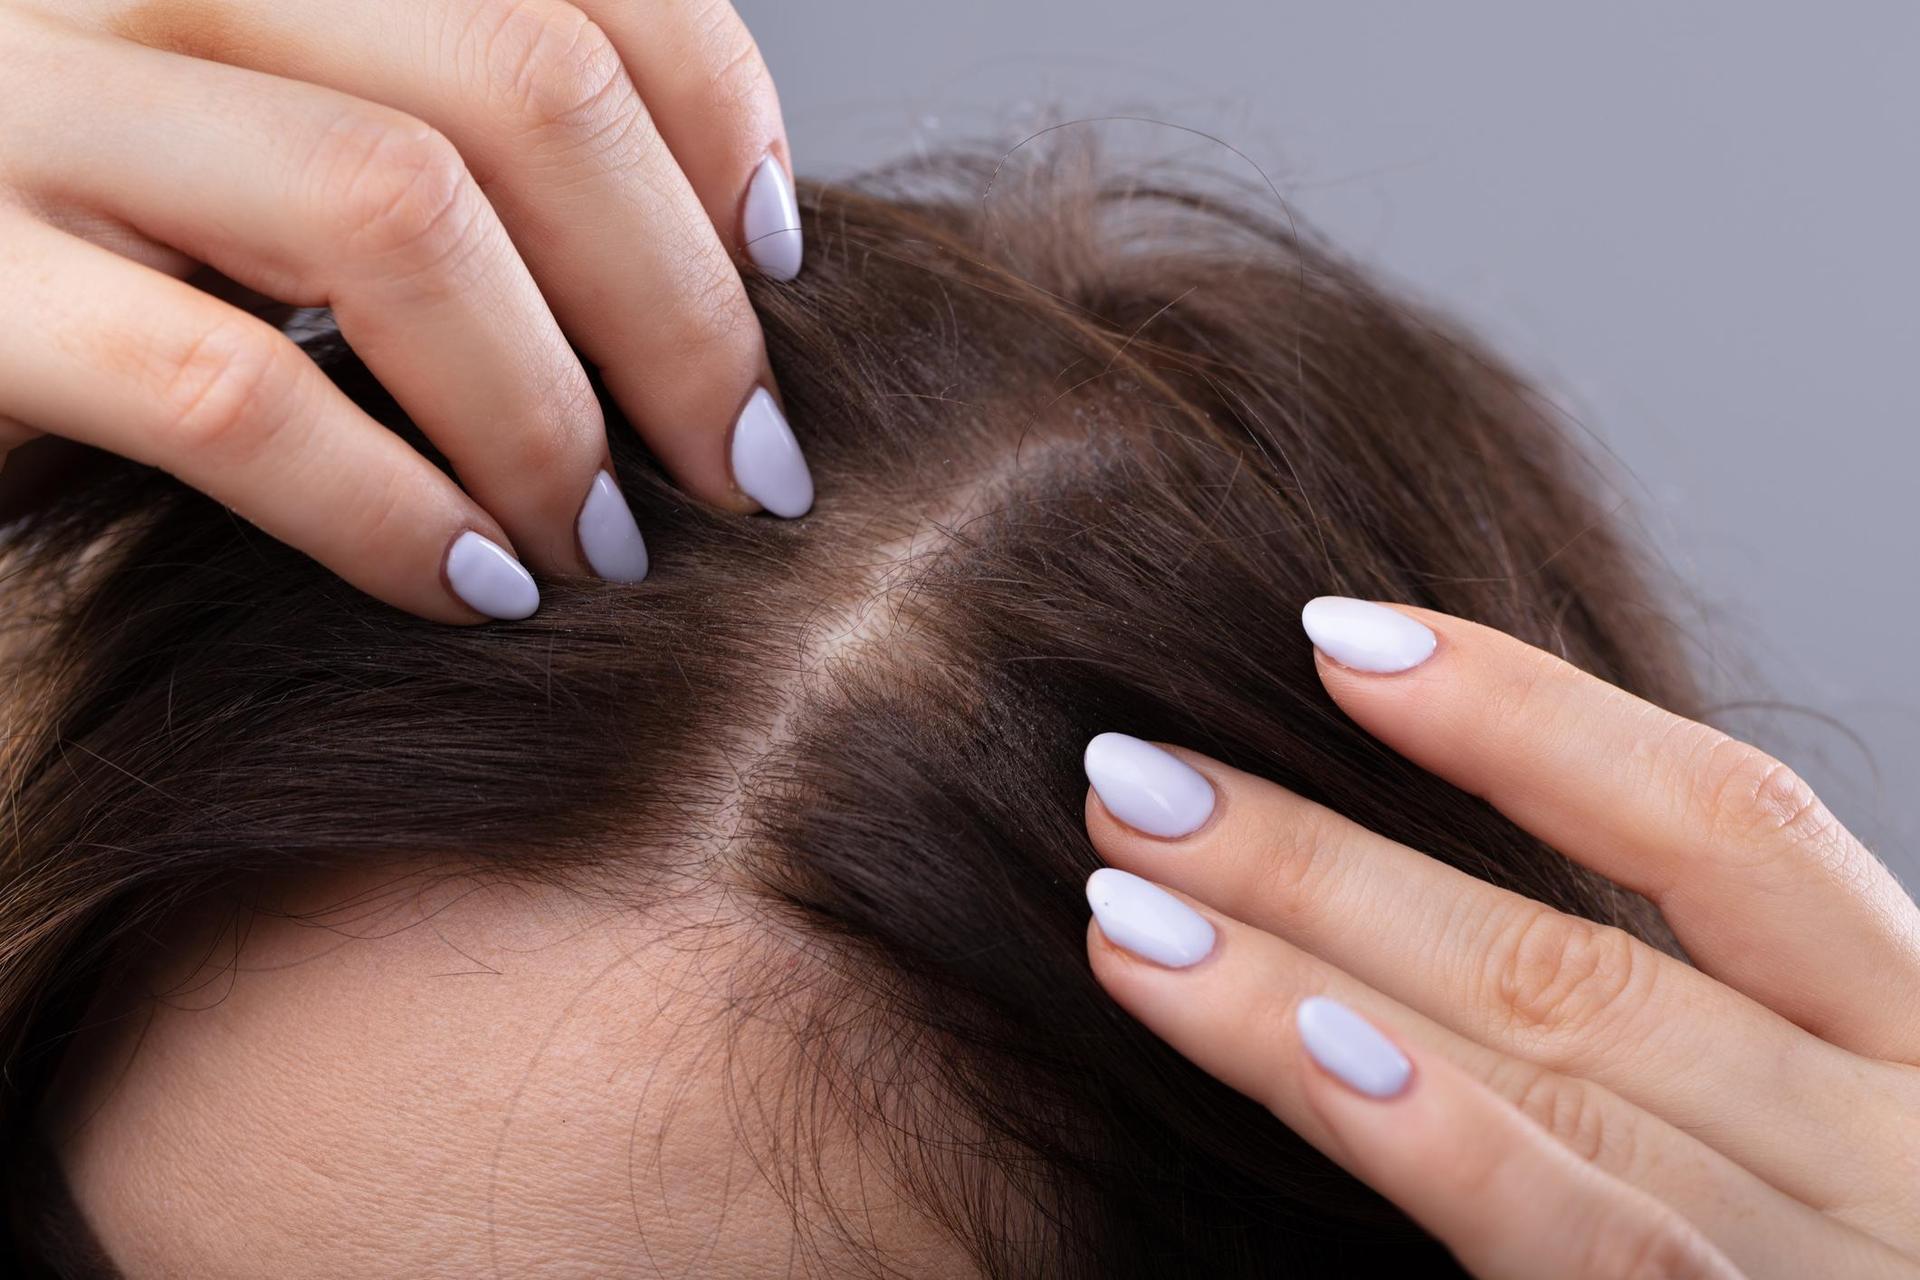 Massage into the scalp once a week.  A flood of new hair guaranteed